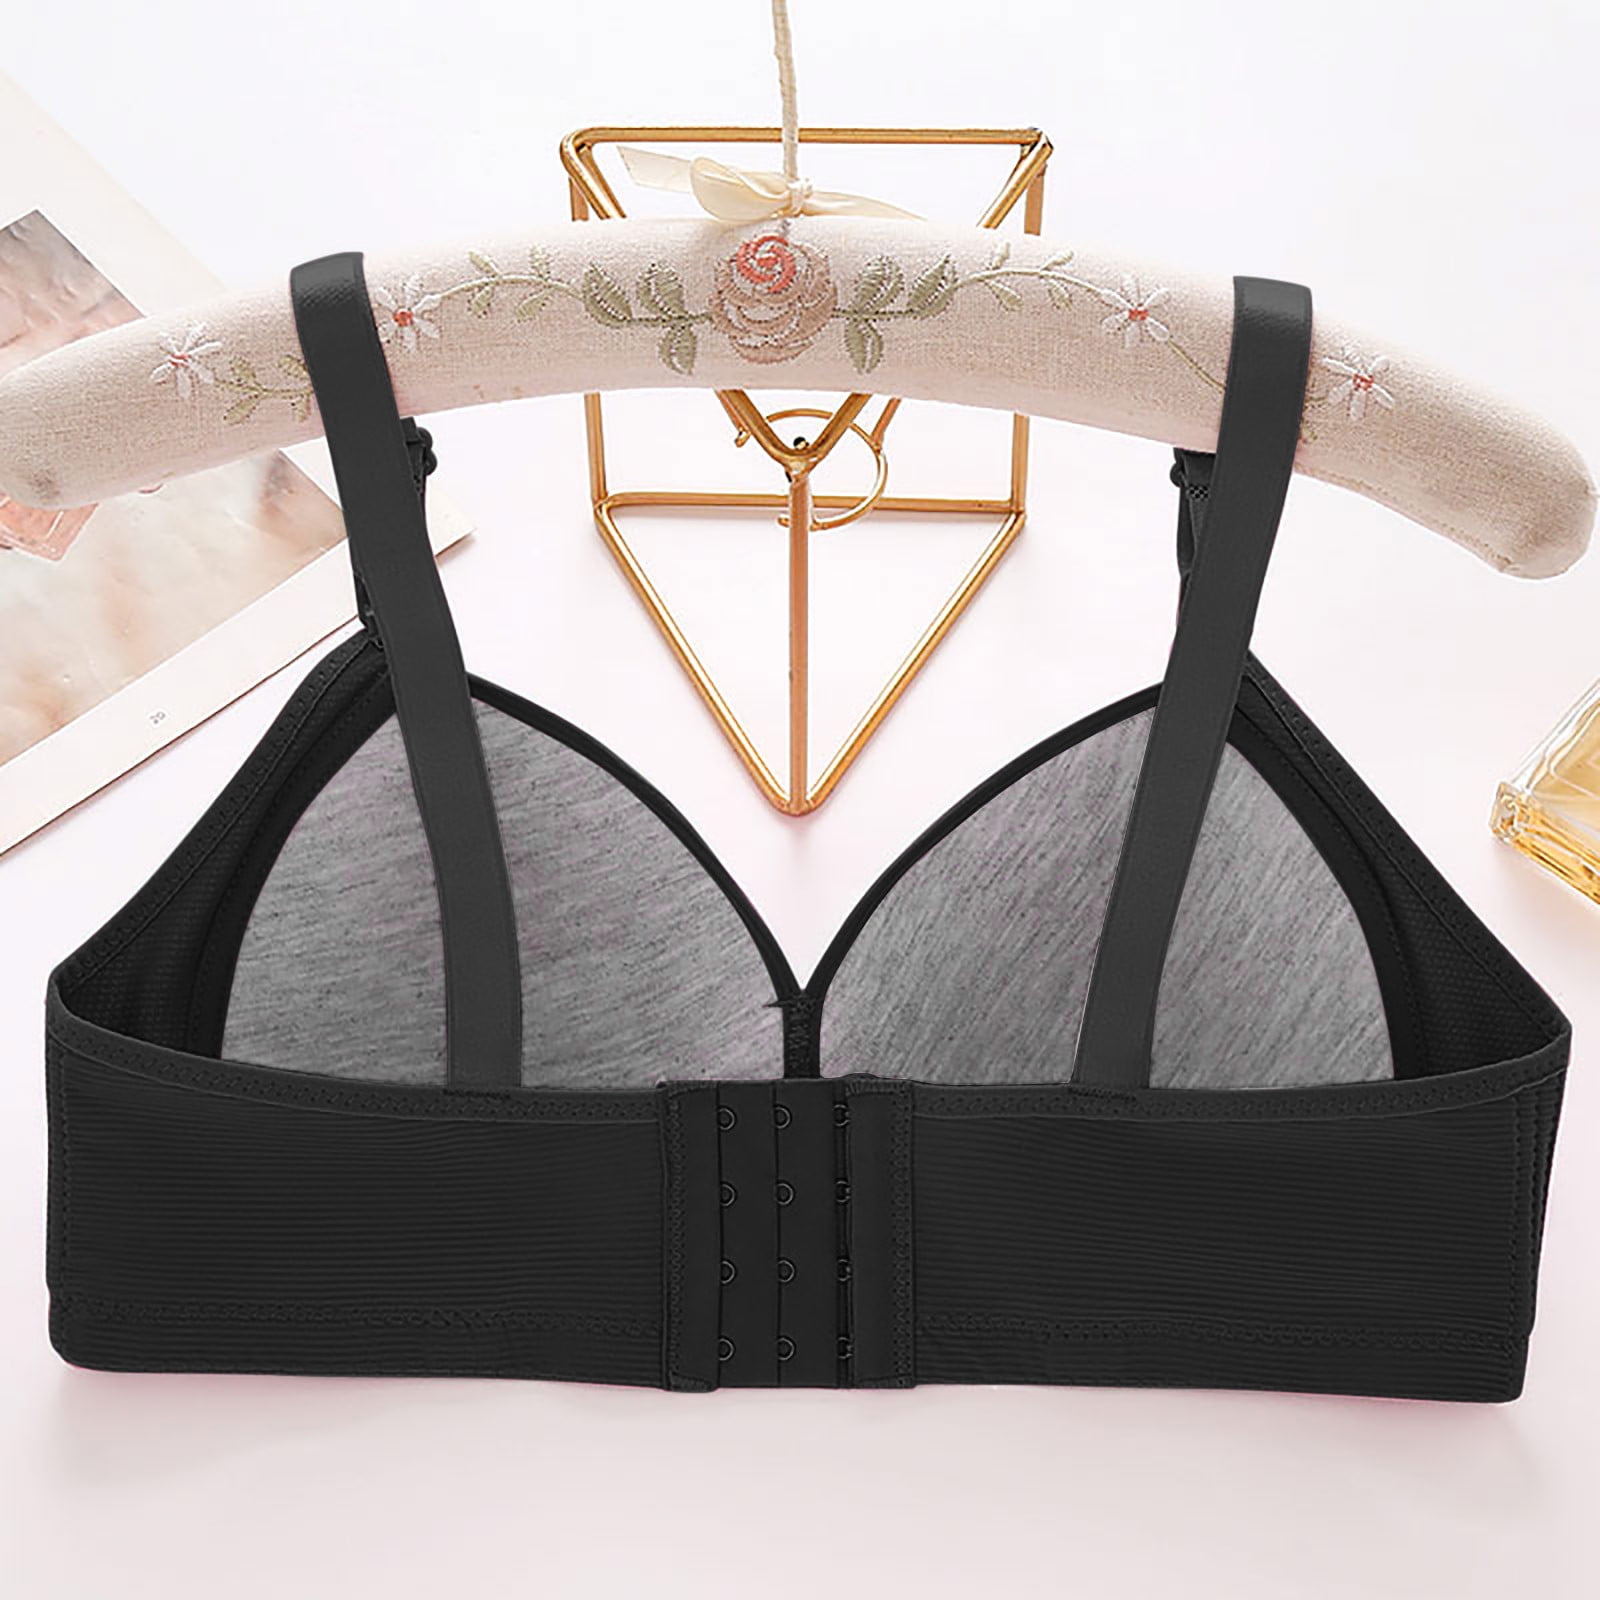 Pejock Everyday Bras for Women, Women's Ultimate Comfort Lift Wirefree Bra  Traceless Comfortable No Steel Ring Vest Breathable Gathering Front Opening